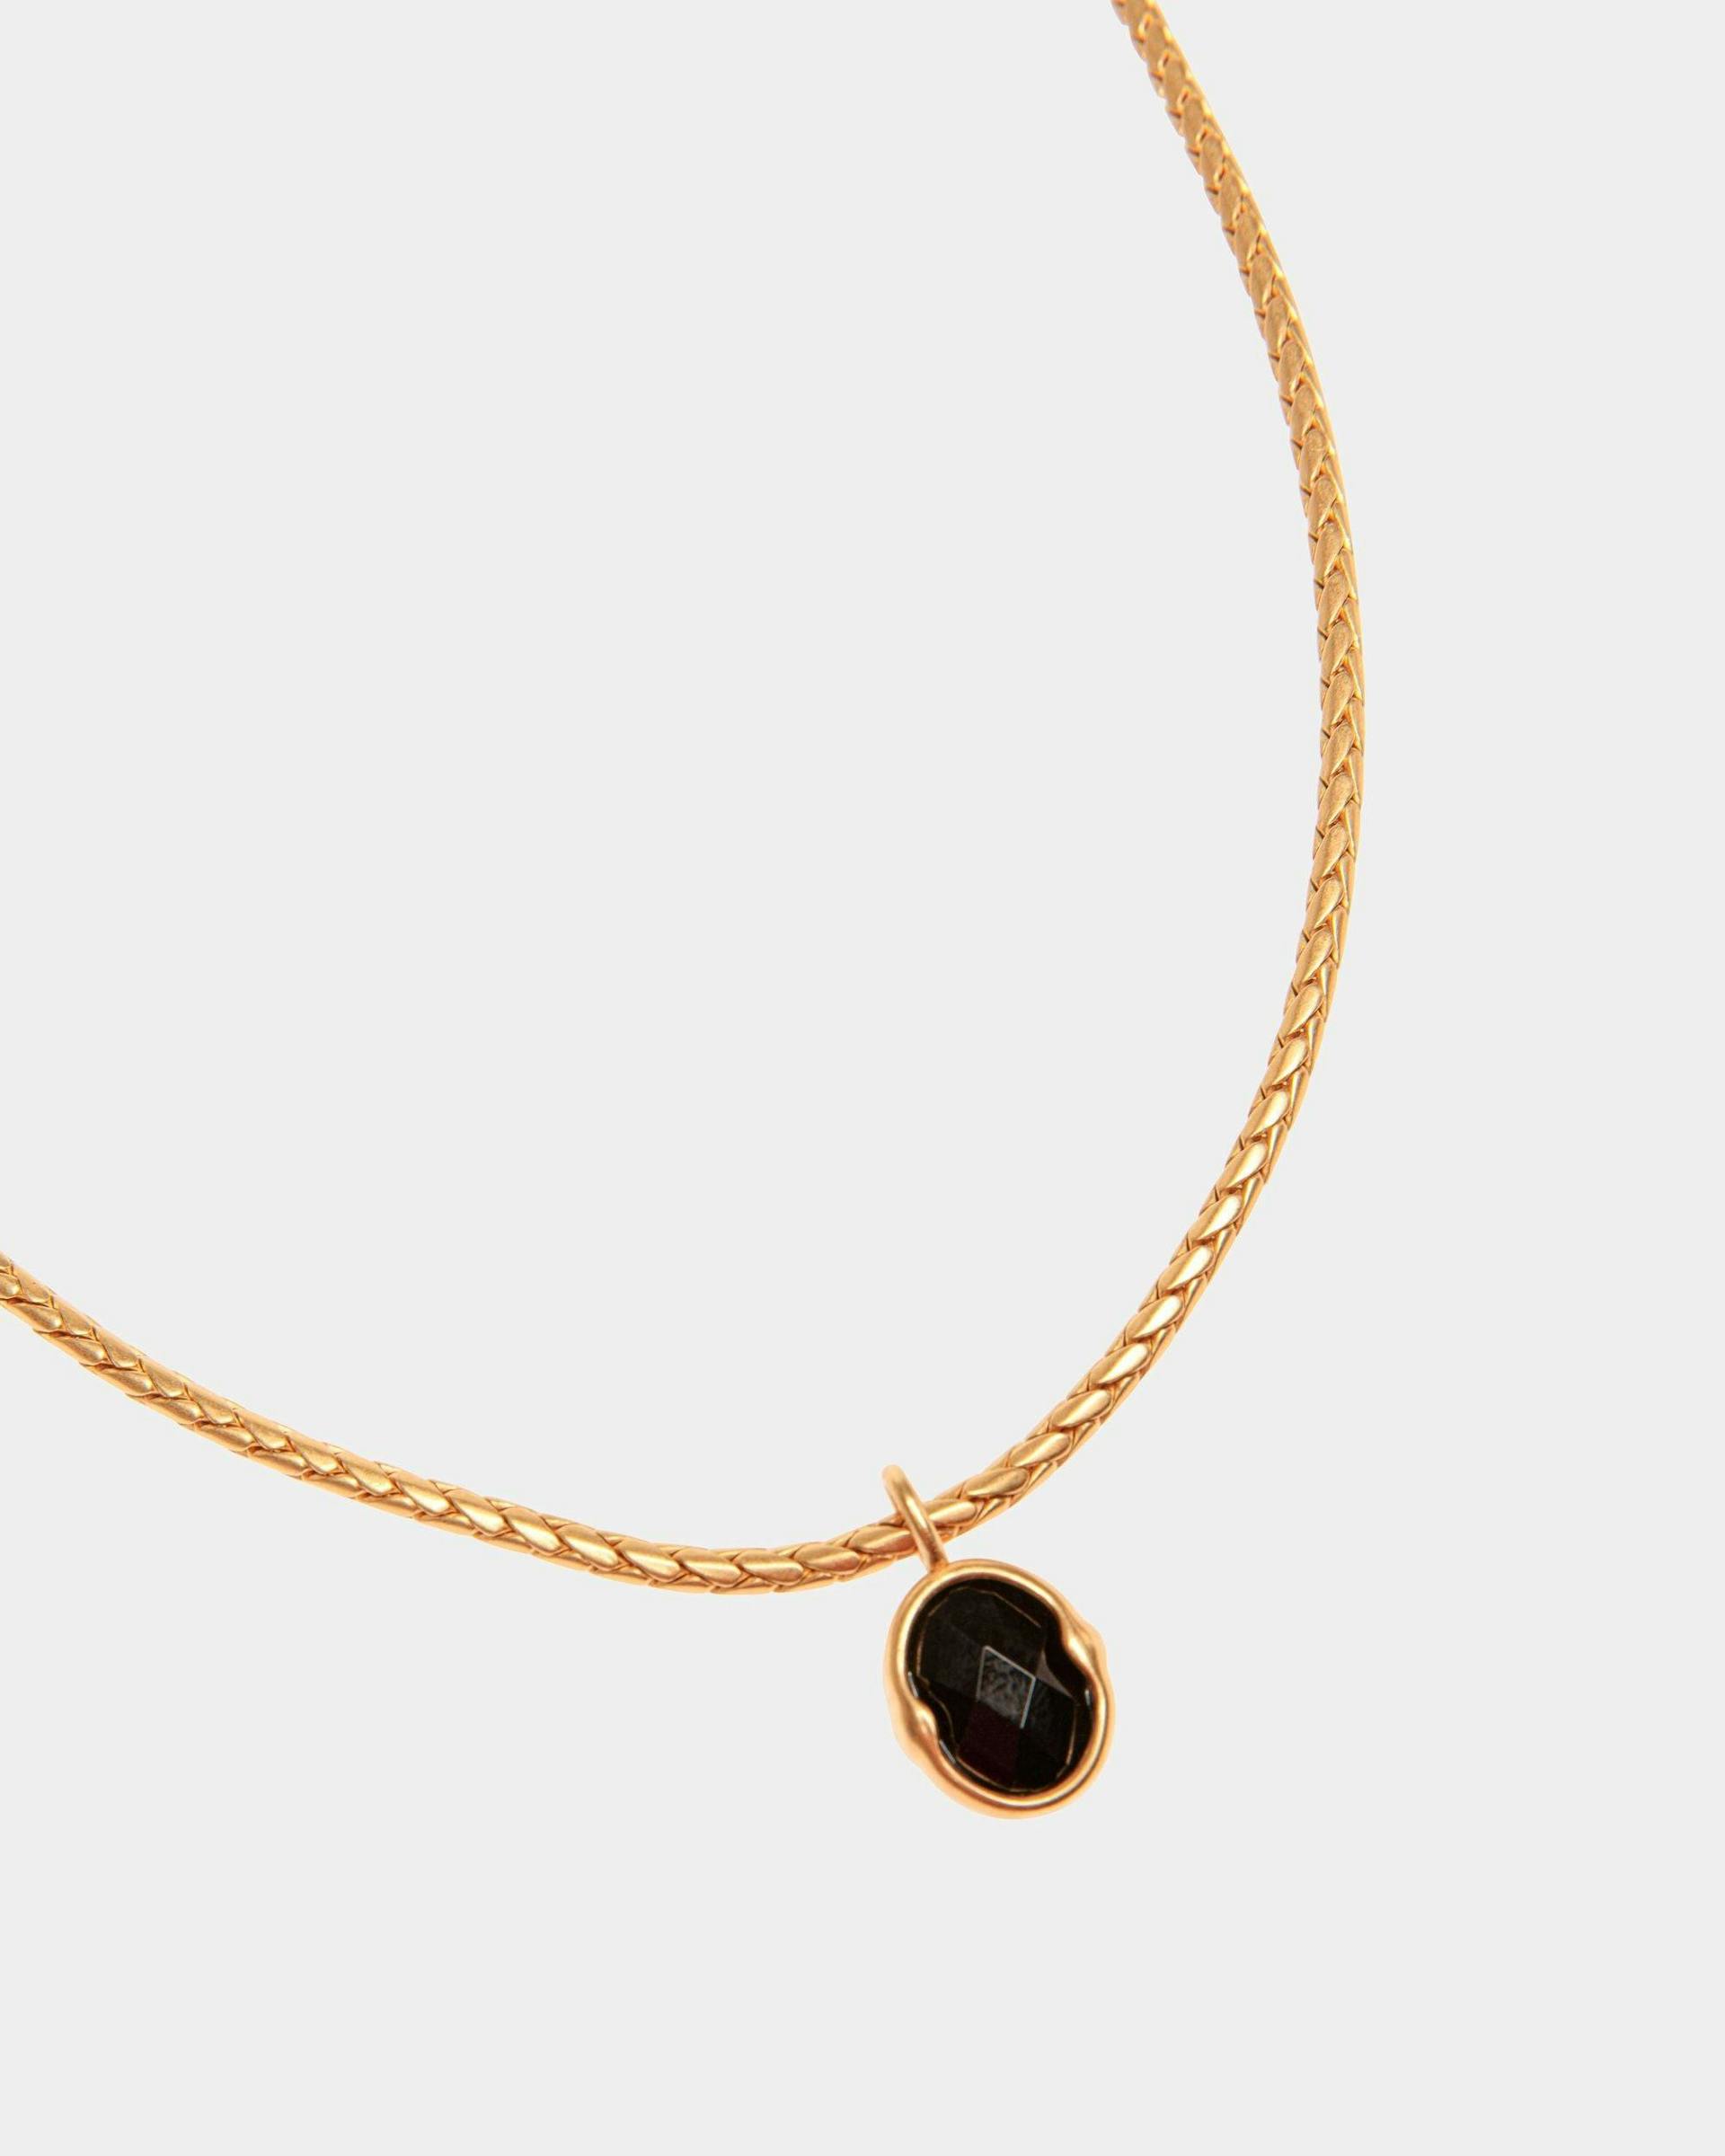 Frame Outline Necklace With A Snake Chain - Women's - Bally - 03